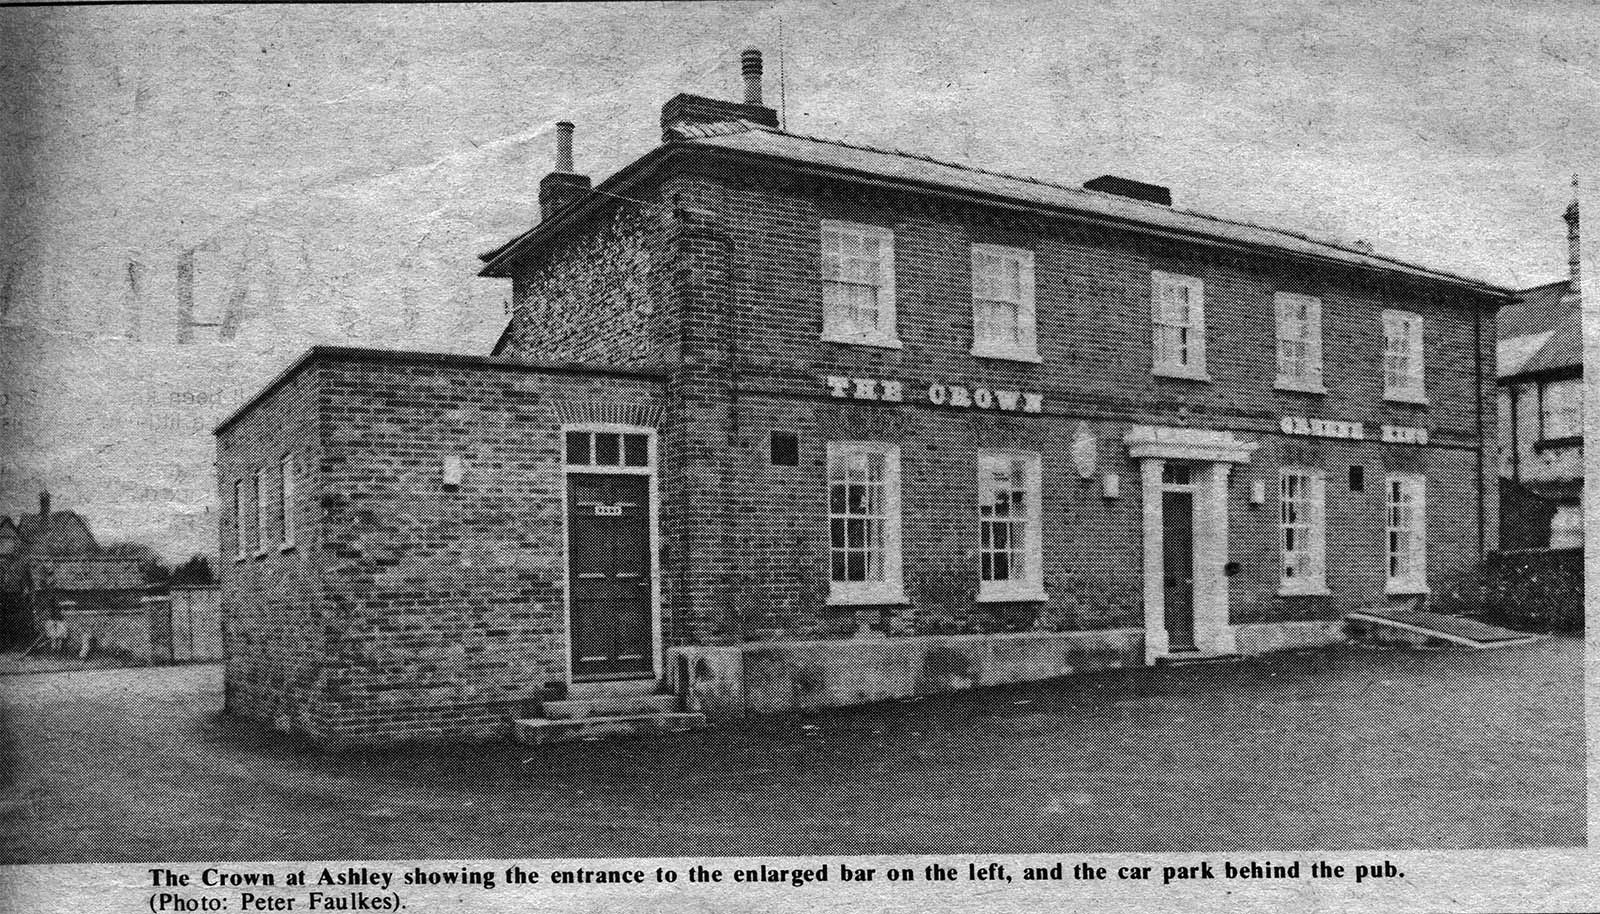 The Crown after renovations 1974